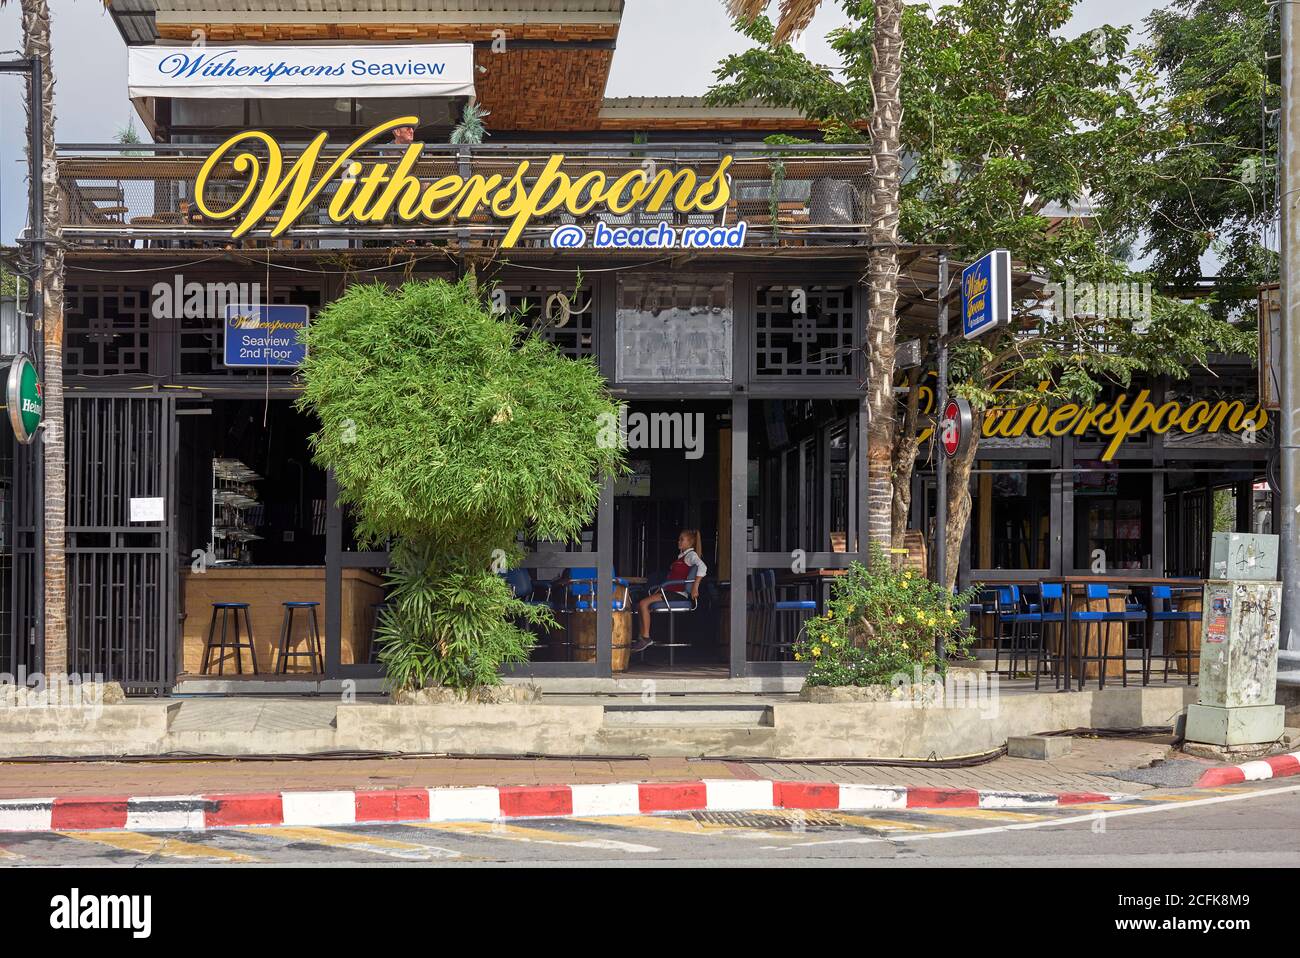 Witherspoons pub, Pattaya Beach Road, Thailand, Southeast Asia, a play on the name of the popular British Wetherspoons chain of pubs Stock Photo